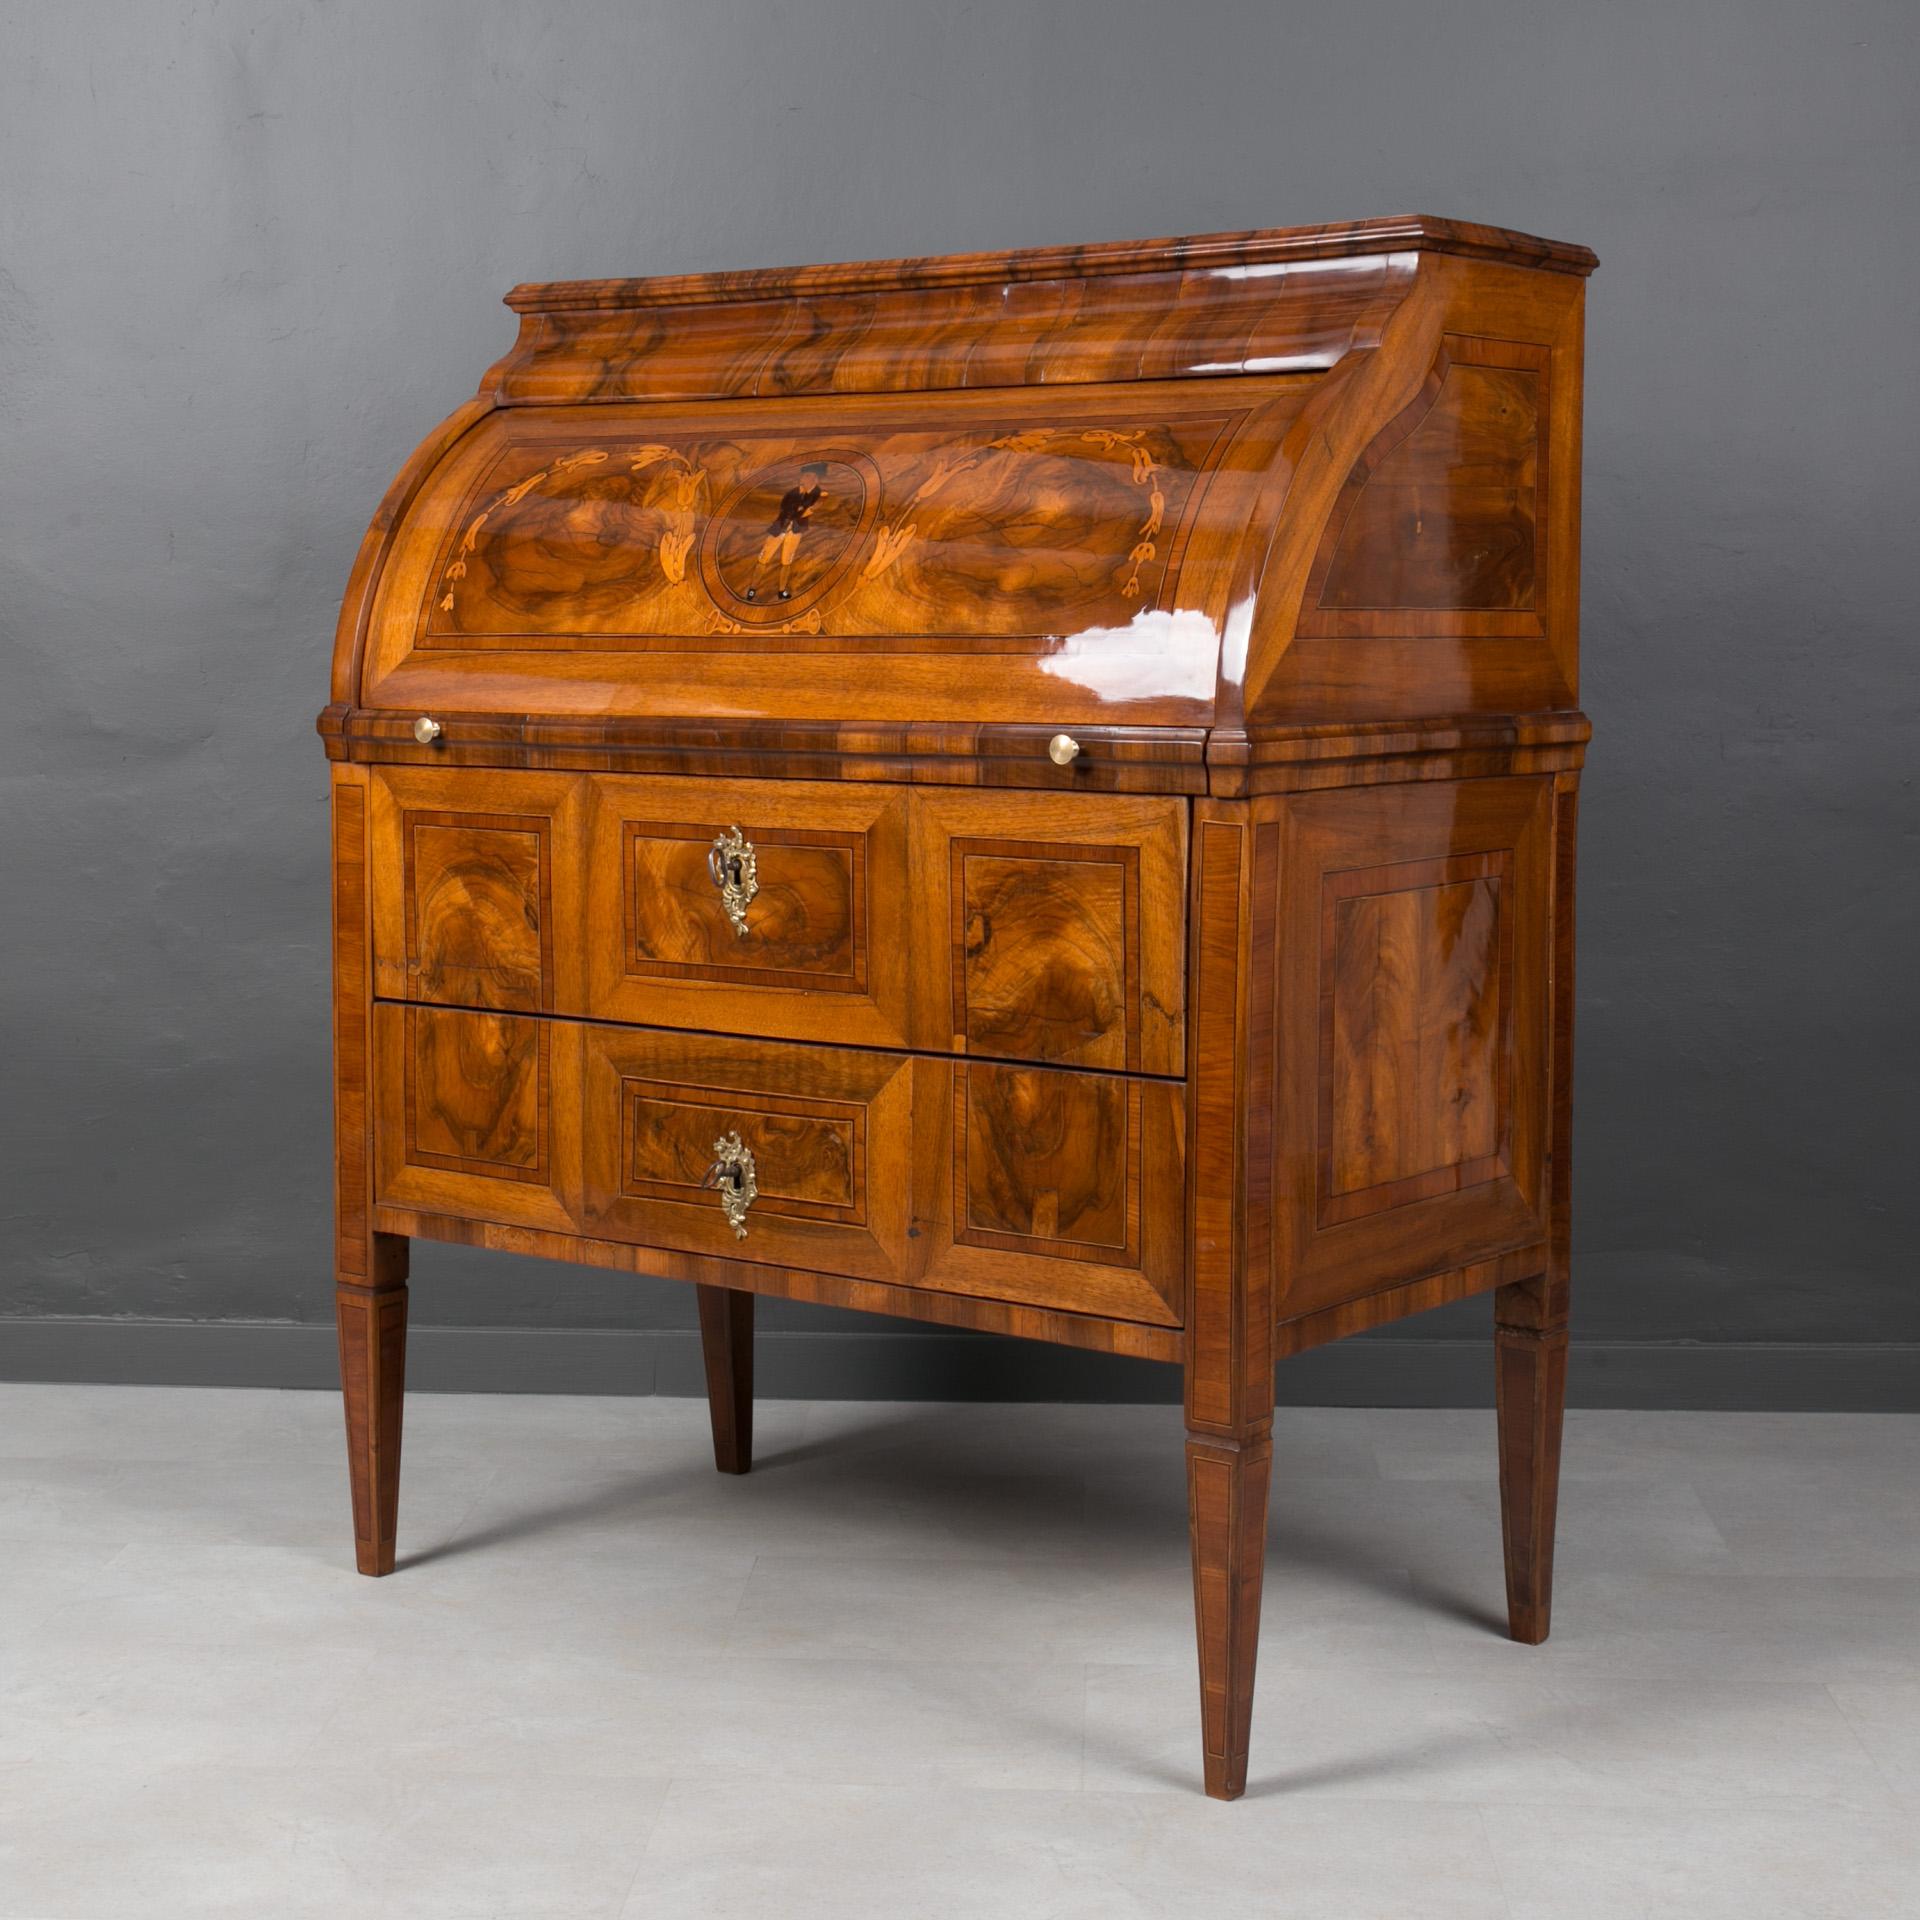 This beautiful Secretary comes from Germany from the beginning of 19th century. The piece is made of coniferous wood, veneered with extraordinary walnut veneer, with very detailed marquetry with floral motifs and a figure of a young man, perhaps a